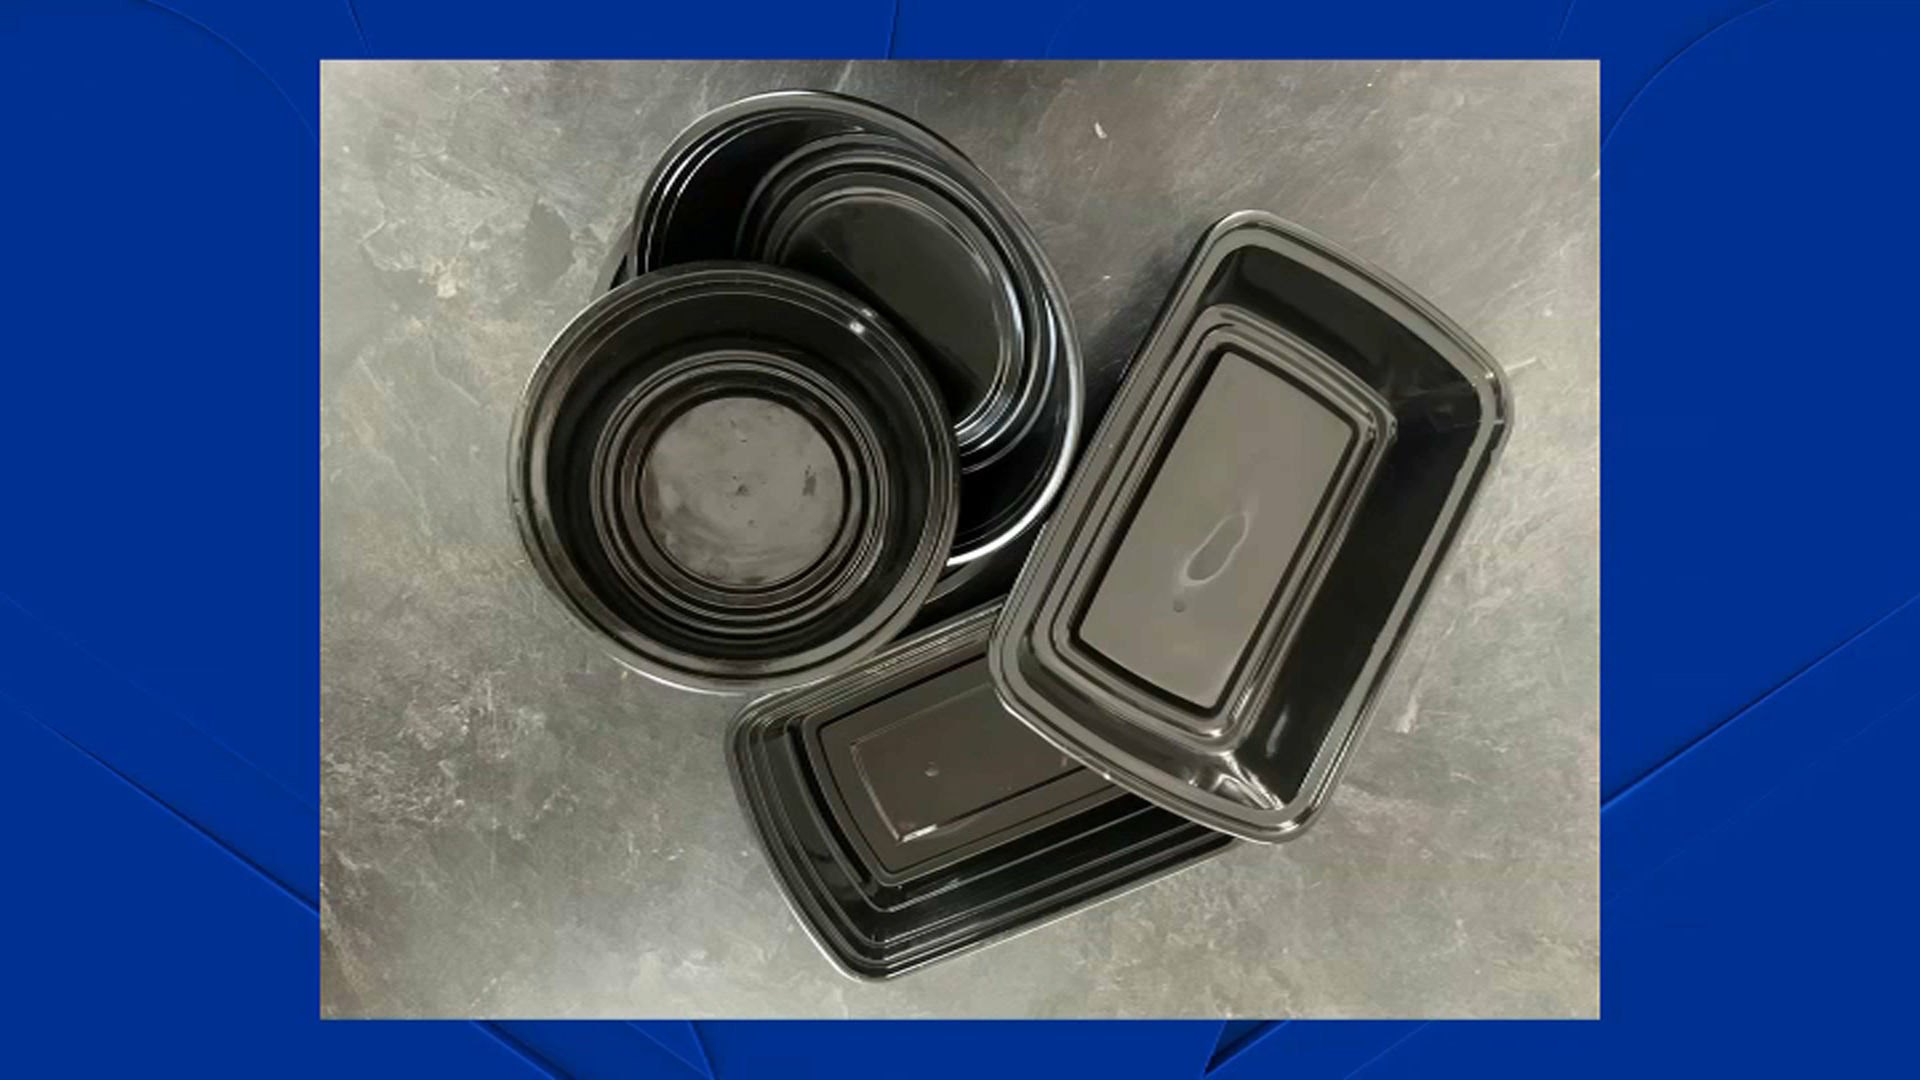 https://media.nbcconnecticut.com/2022/08/black-plastic-containers.png?fit=1920%2C1080&quality=85&strip=all